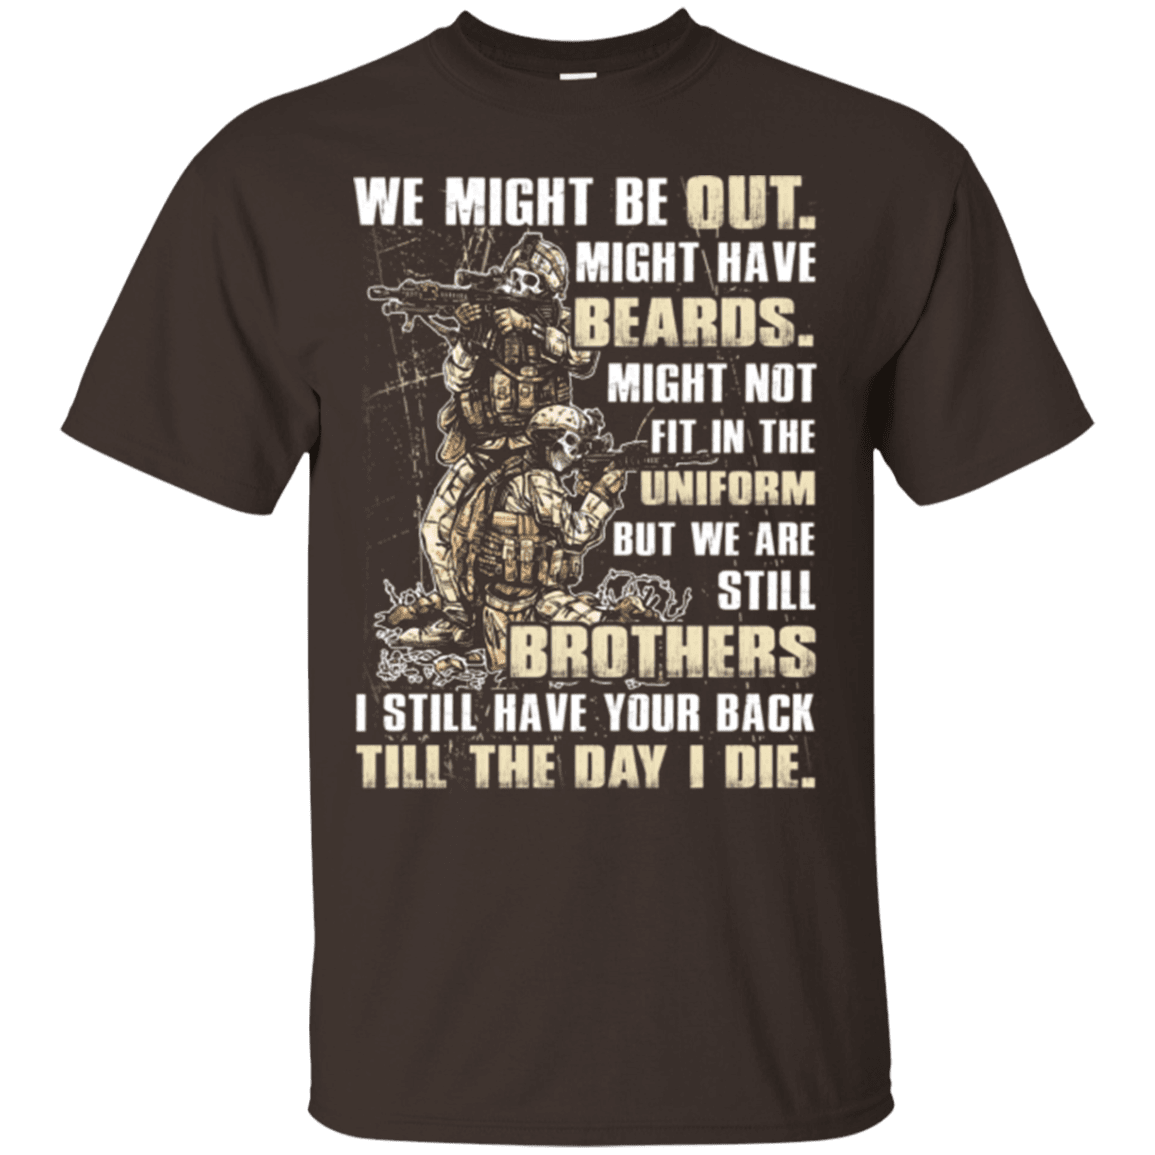 Military T-Shirt "Brothers Till The Day I Die Veteran" Front-TShirt-General-Veterans Nation